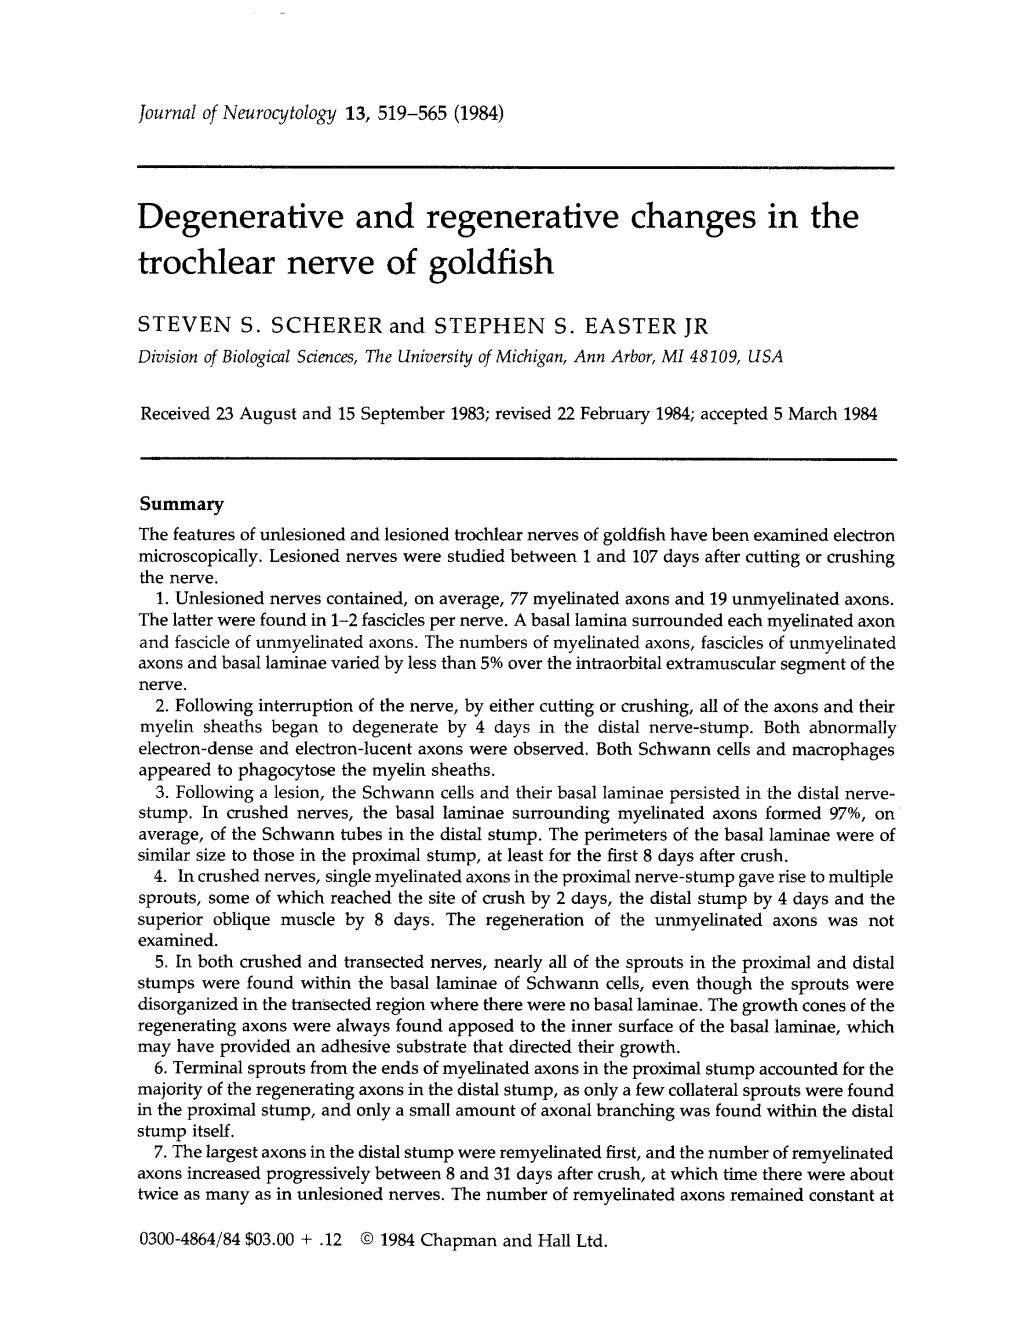 Degenerative and Regenerative Changes in the Trochlear Nerve of Goldfish